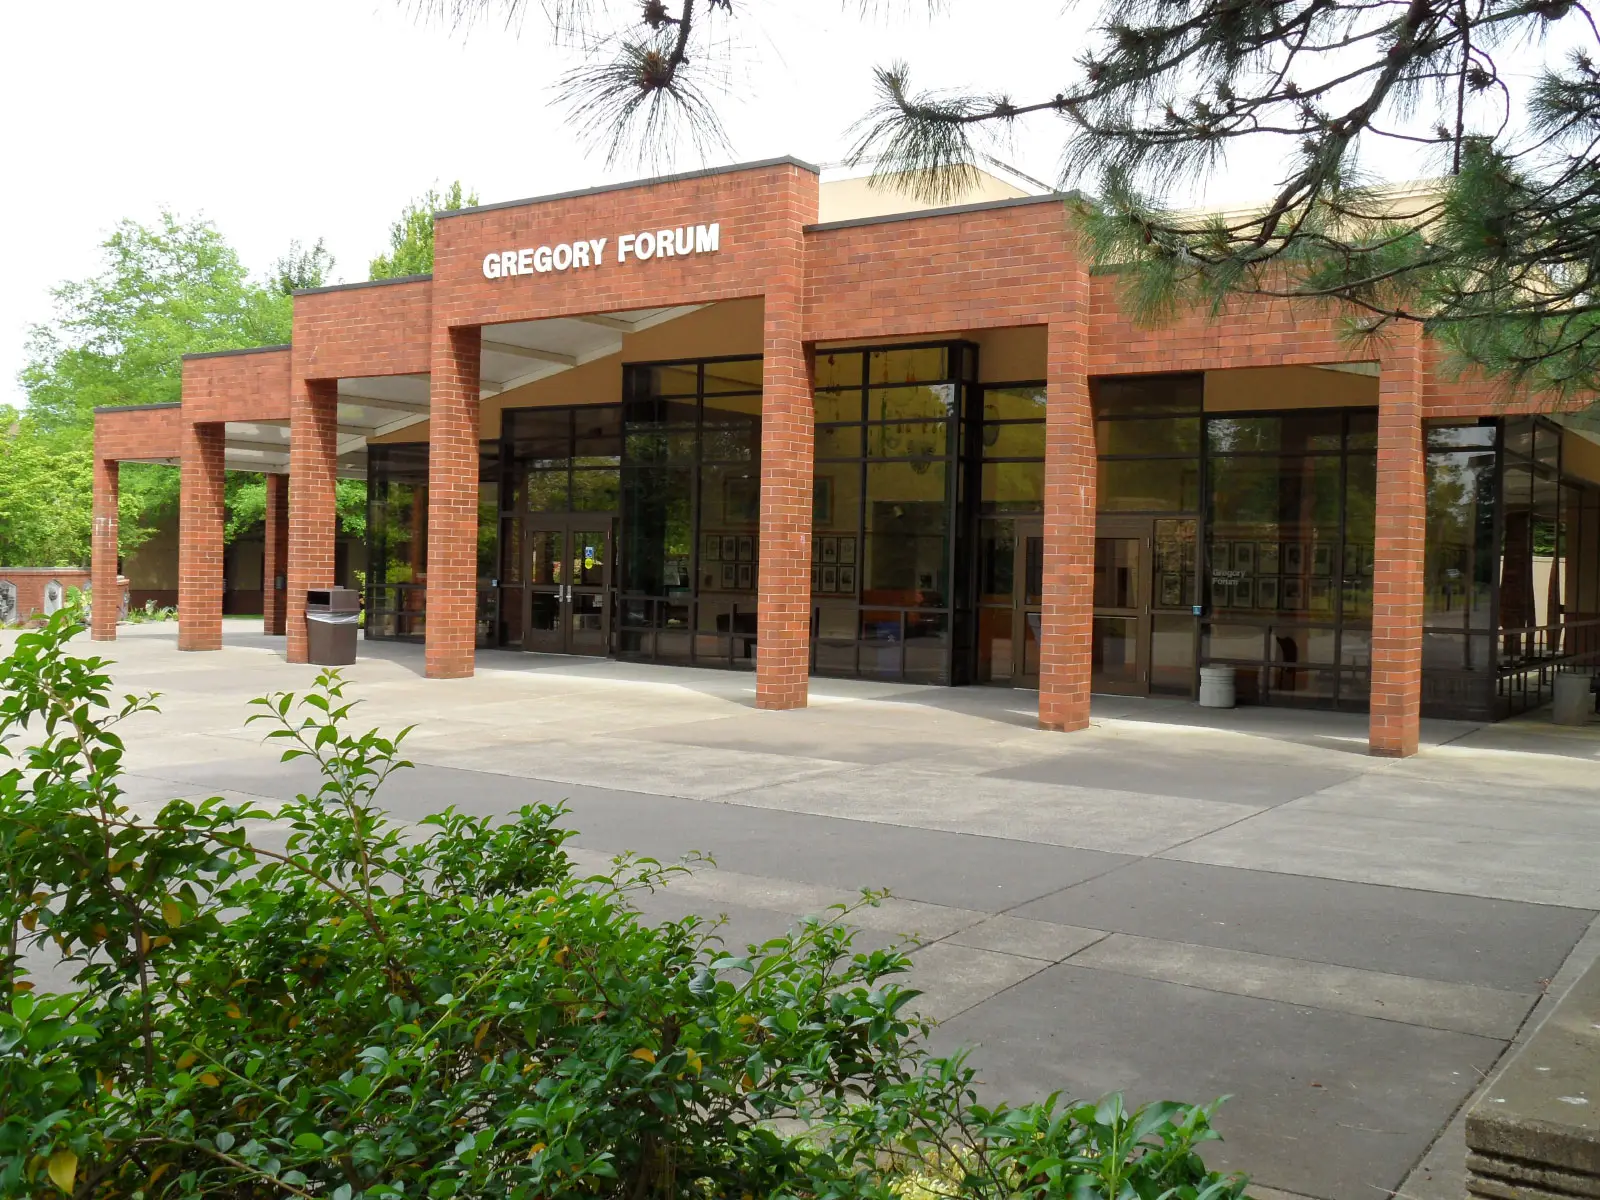 The entrance to Gregory Forum, featuring brick arches, full walls of glass and leafy surroundings at the Oregon City campus